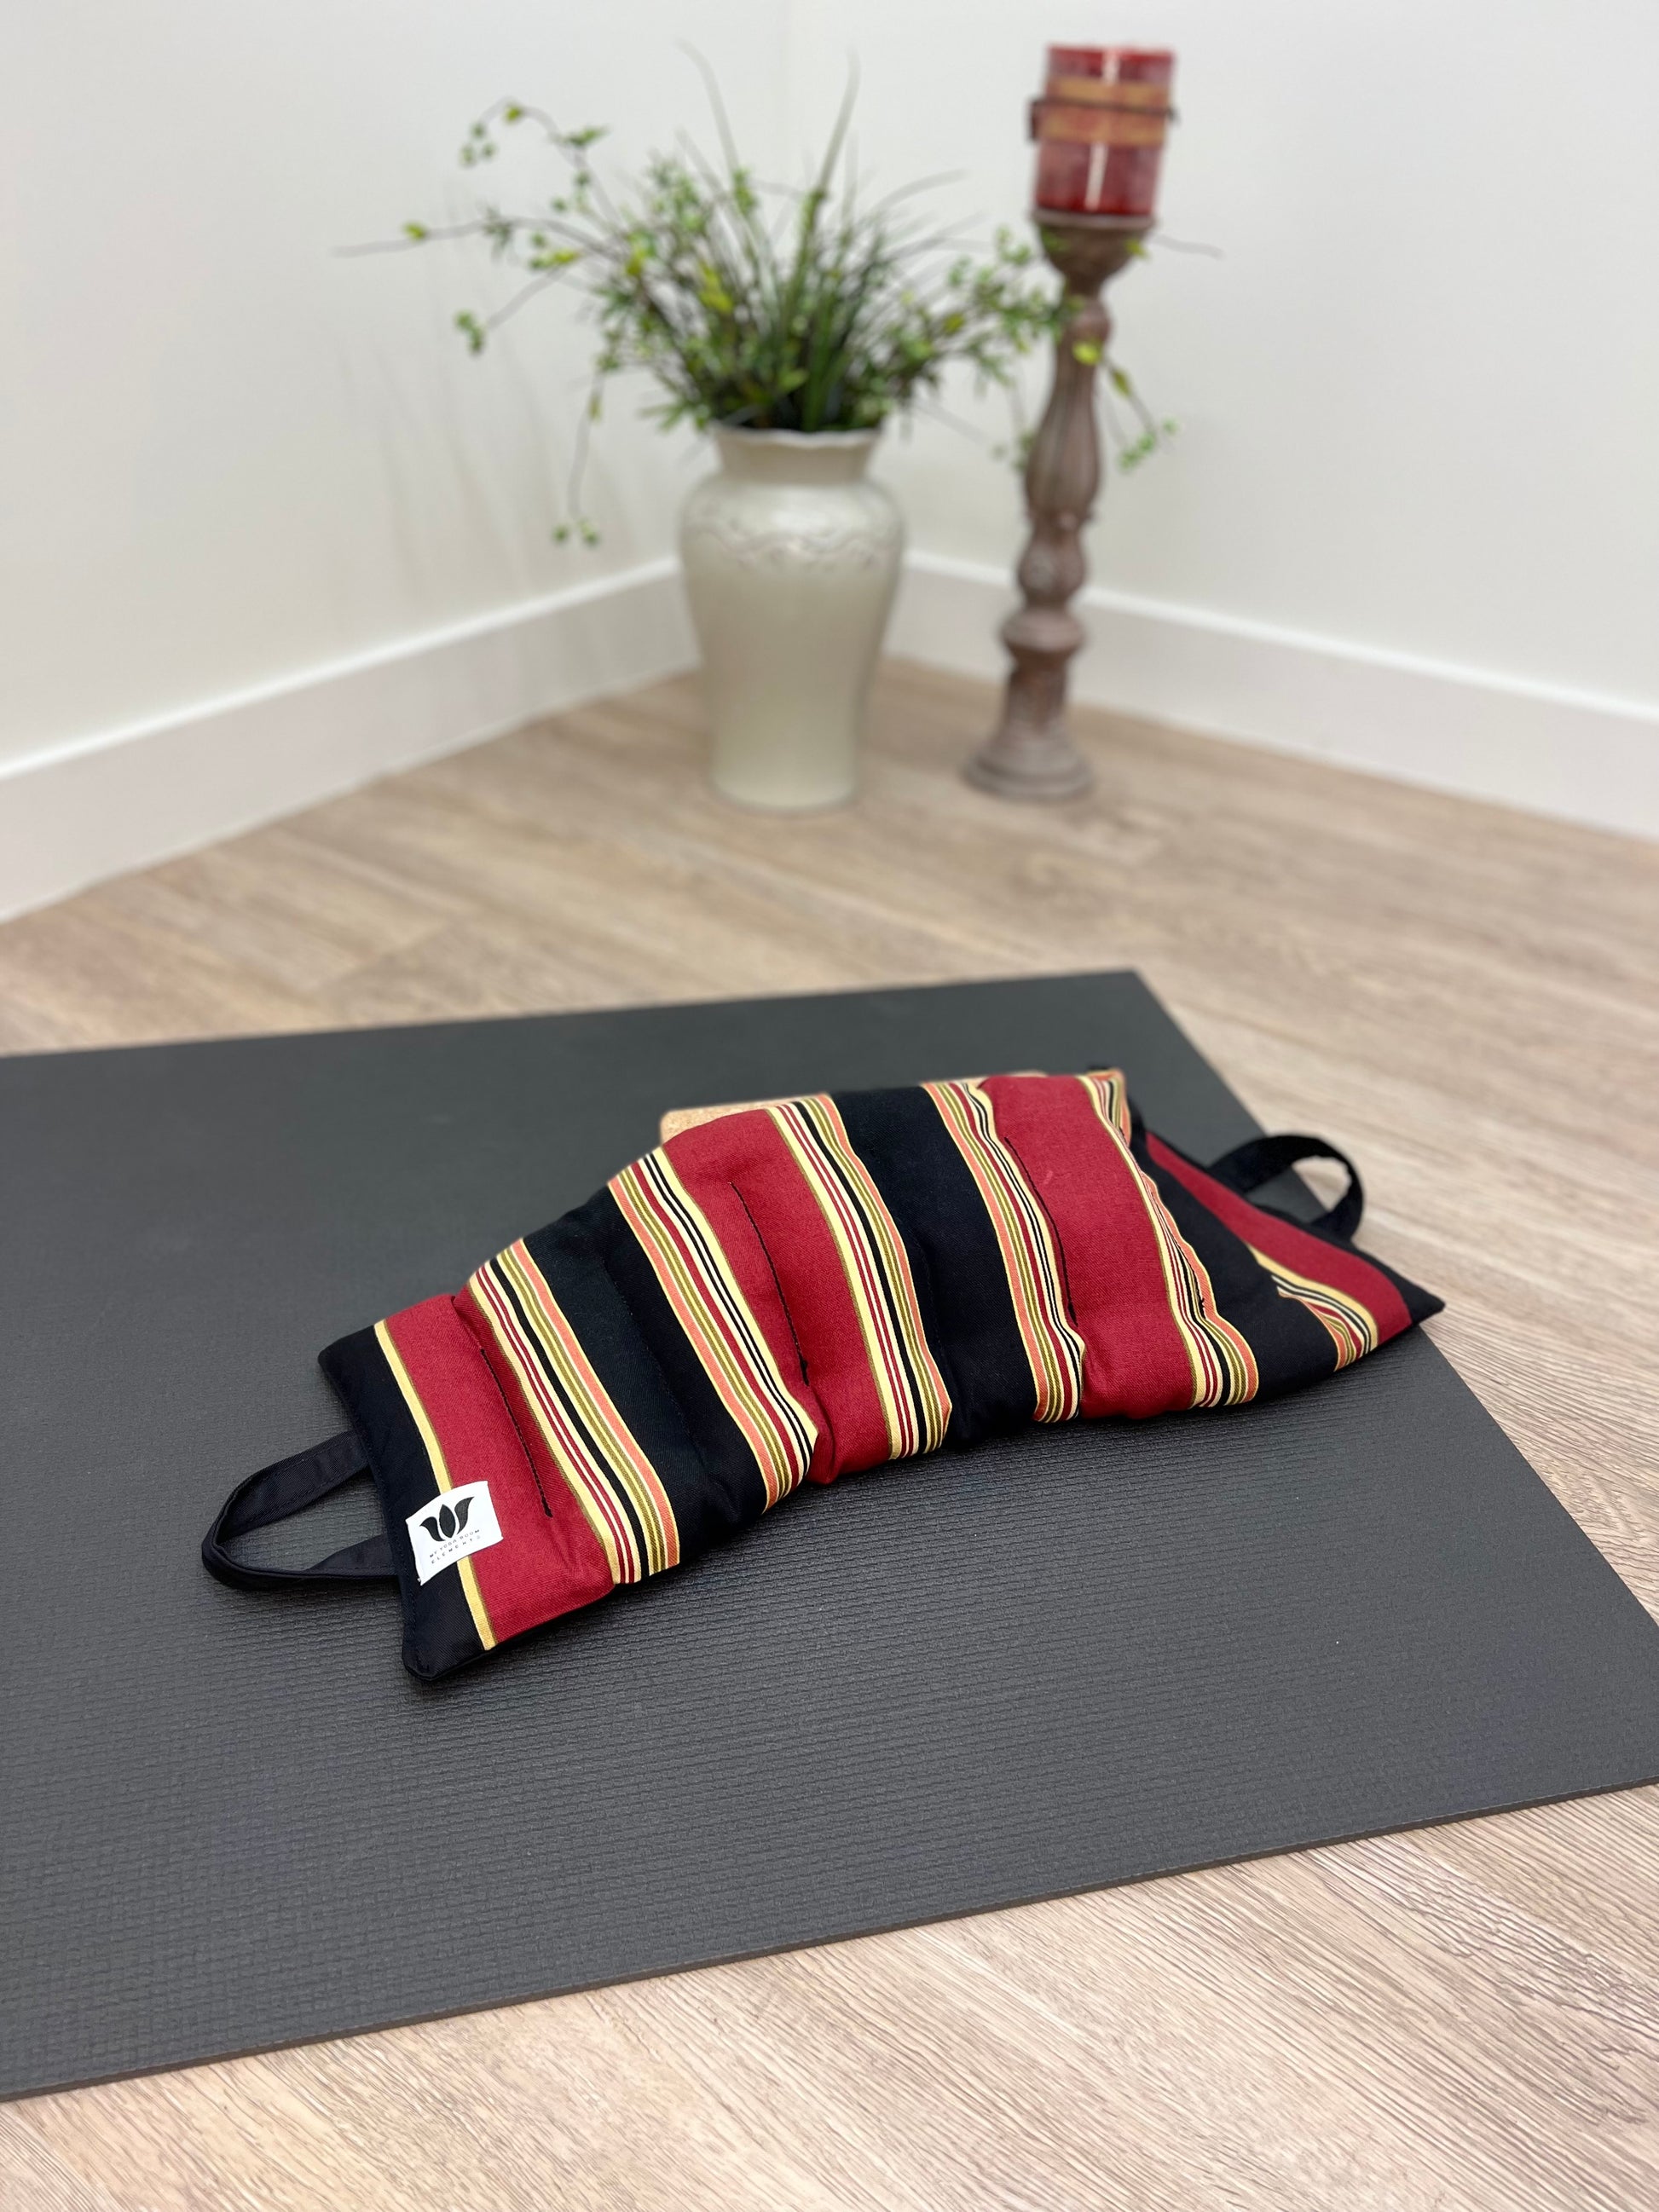 Yoga Sandbag version by My Yoga Room Elements. Add grounding to your practice with this heatable yoga prop. Handcrafted in Calgary in canvas striped fabric.